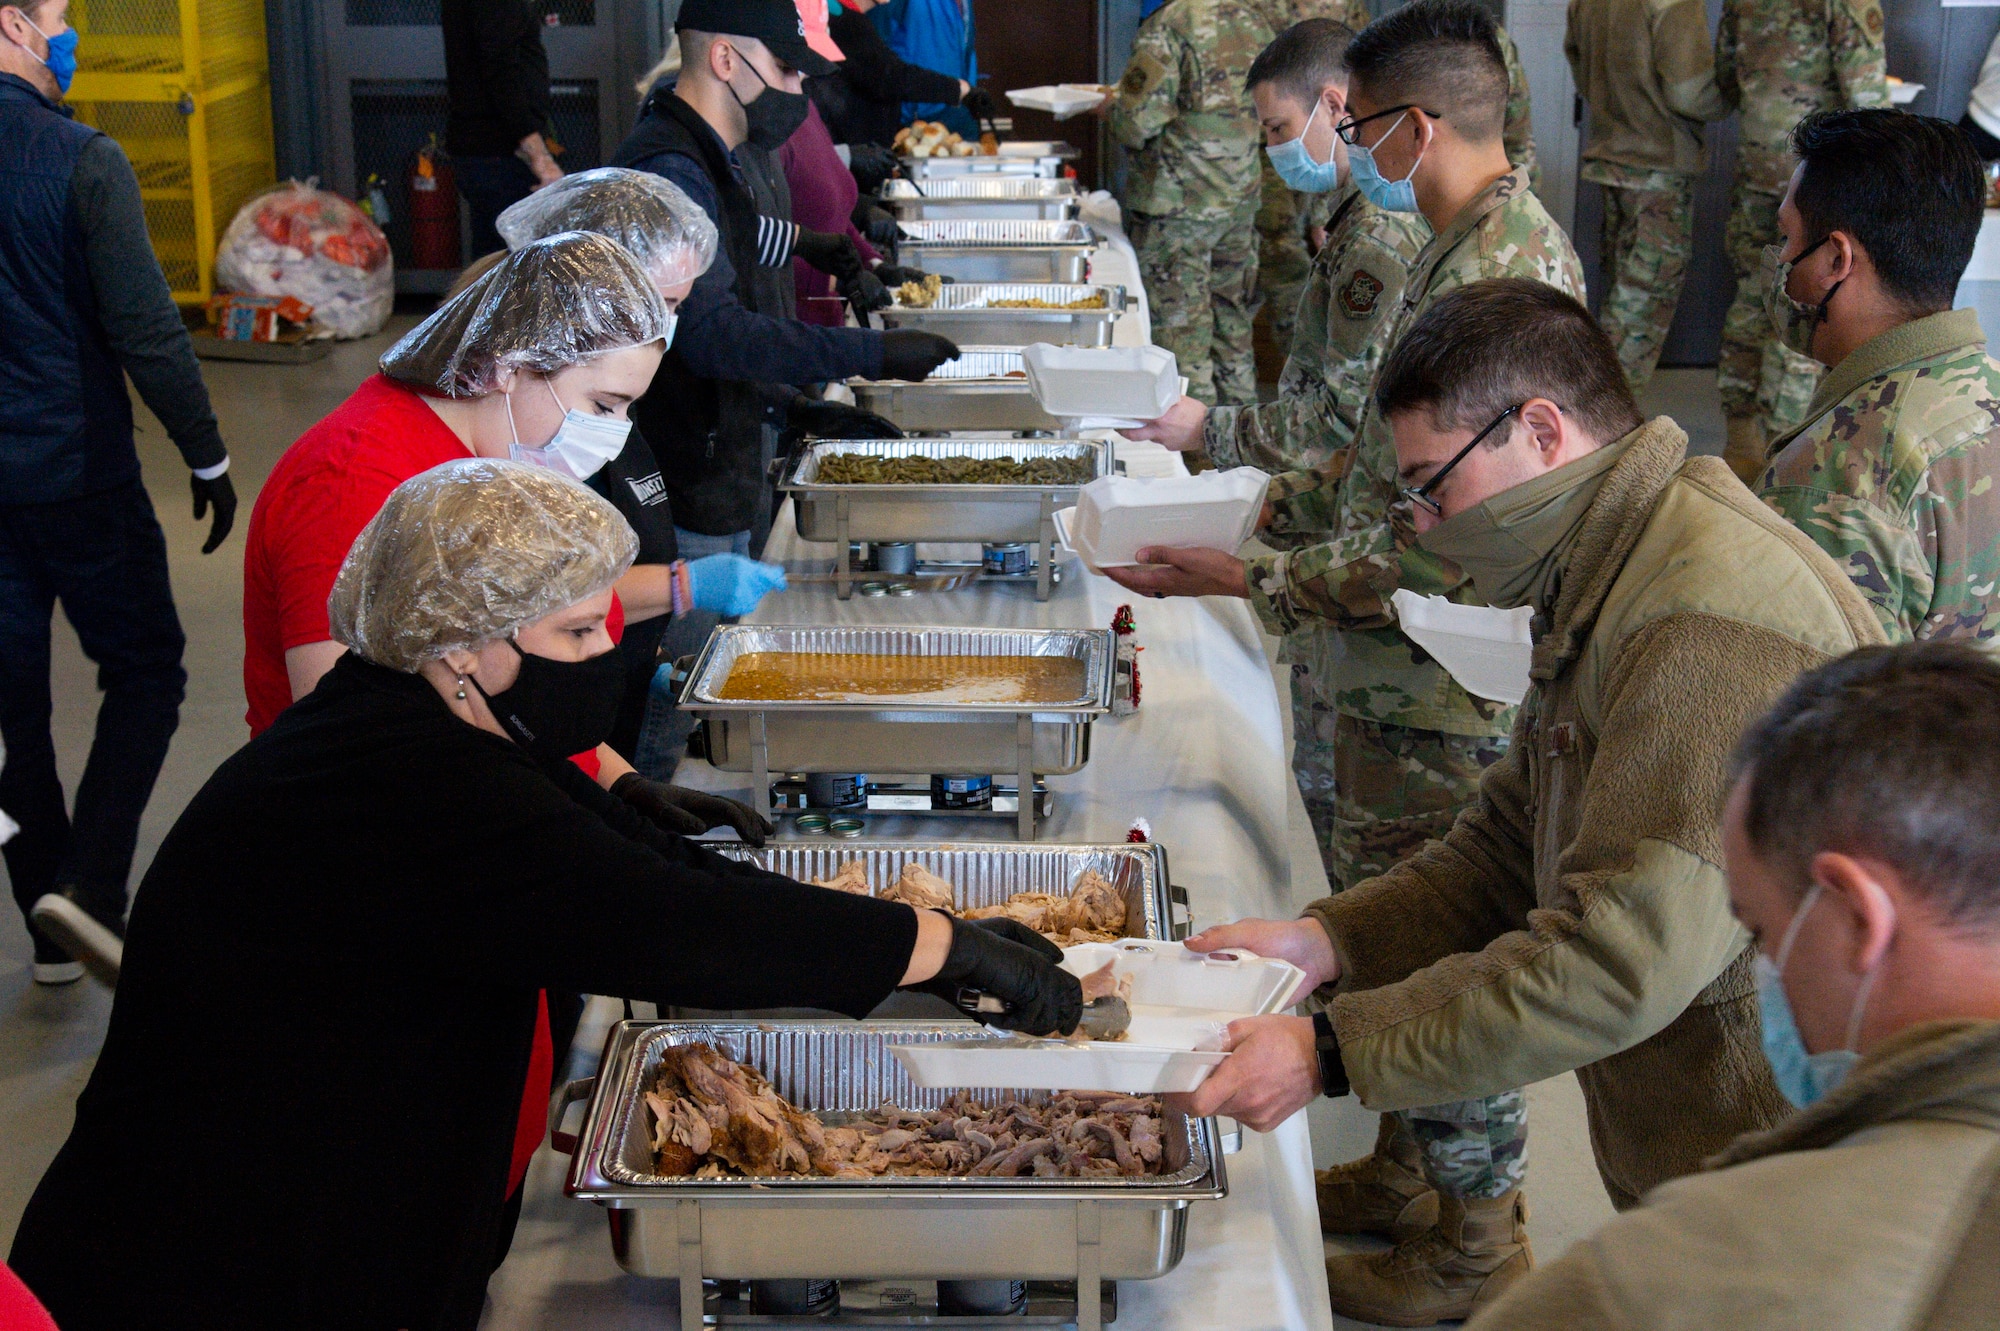 Volunteers serve Team Dover members as they move through the serving line during Operation Feed the Troops on Dover Air Force Base, Delaware, Dec. 14, 2021. OFTT volunteers served a traditional holiday meal to more than 900 Team Dover members. (U.S. Air Force photo by Roland Balik)